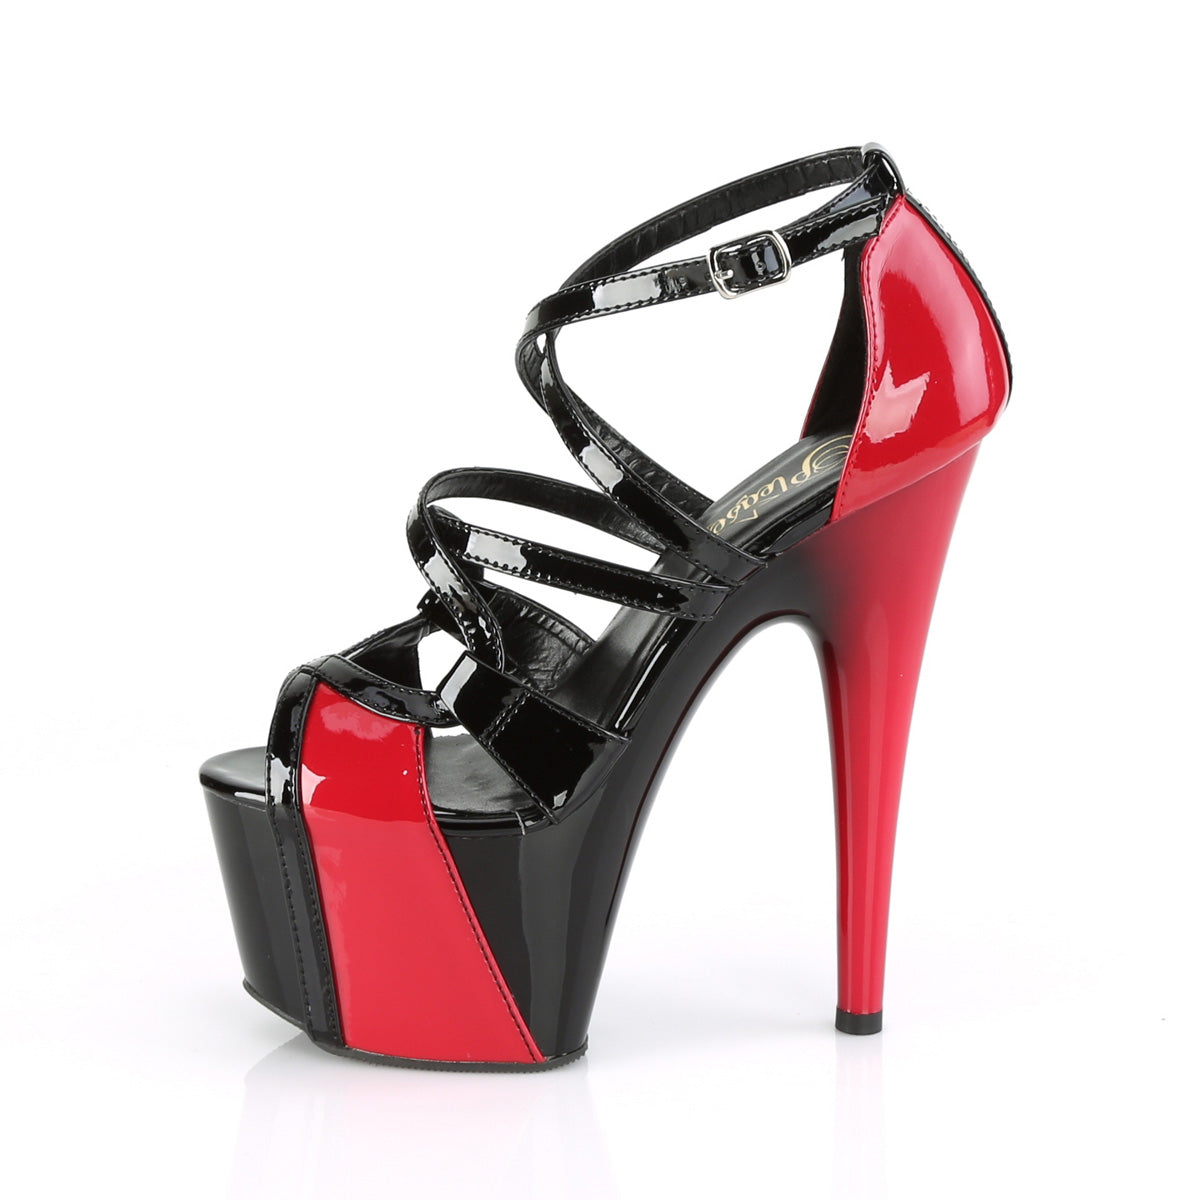 Pleaser Womens Sandals ADORE-764 Blk-Red Pat/Blk-Red